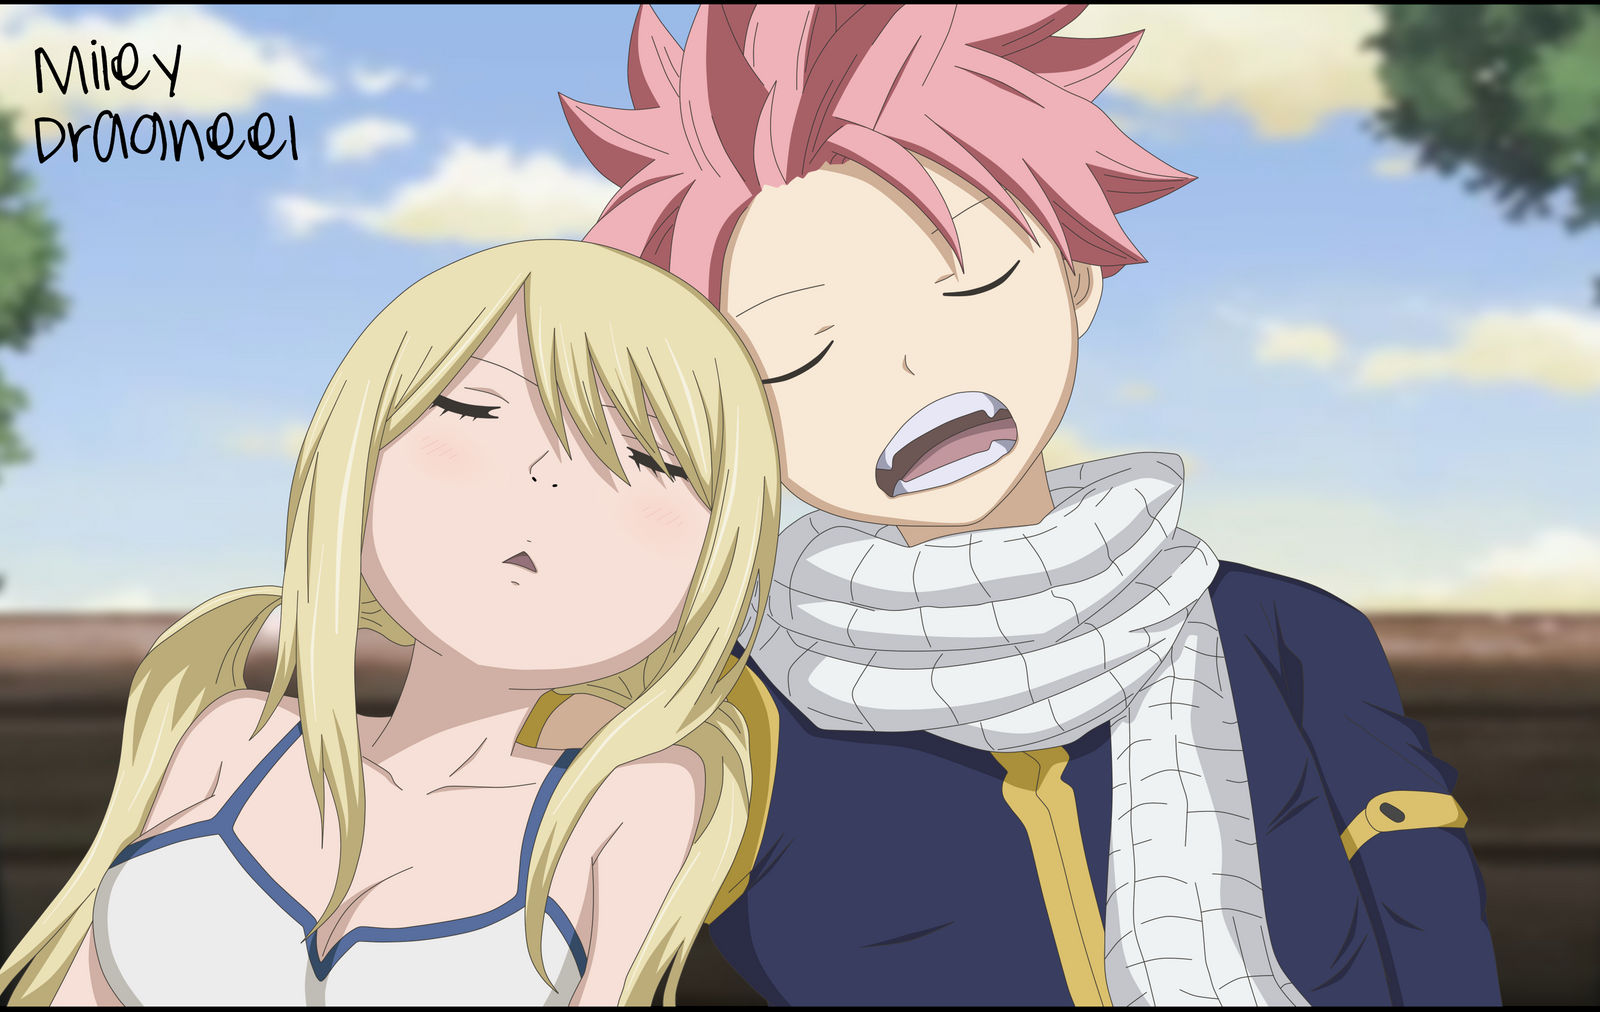 Lucy And Natsu Chapter 532 Fairy Tail By Mileydragneelve On Deviantart